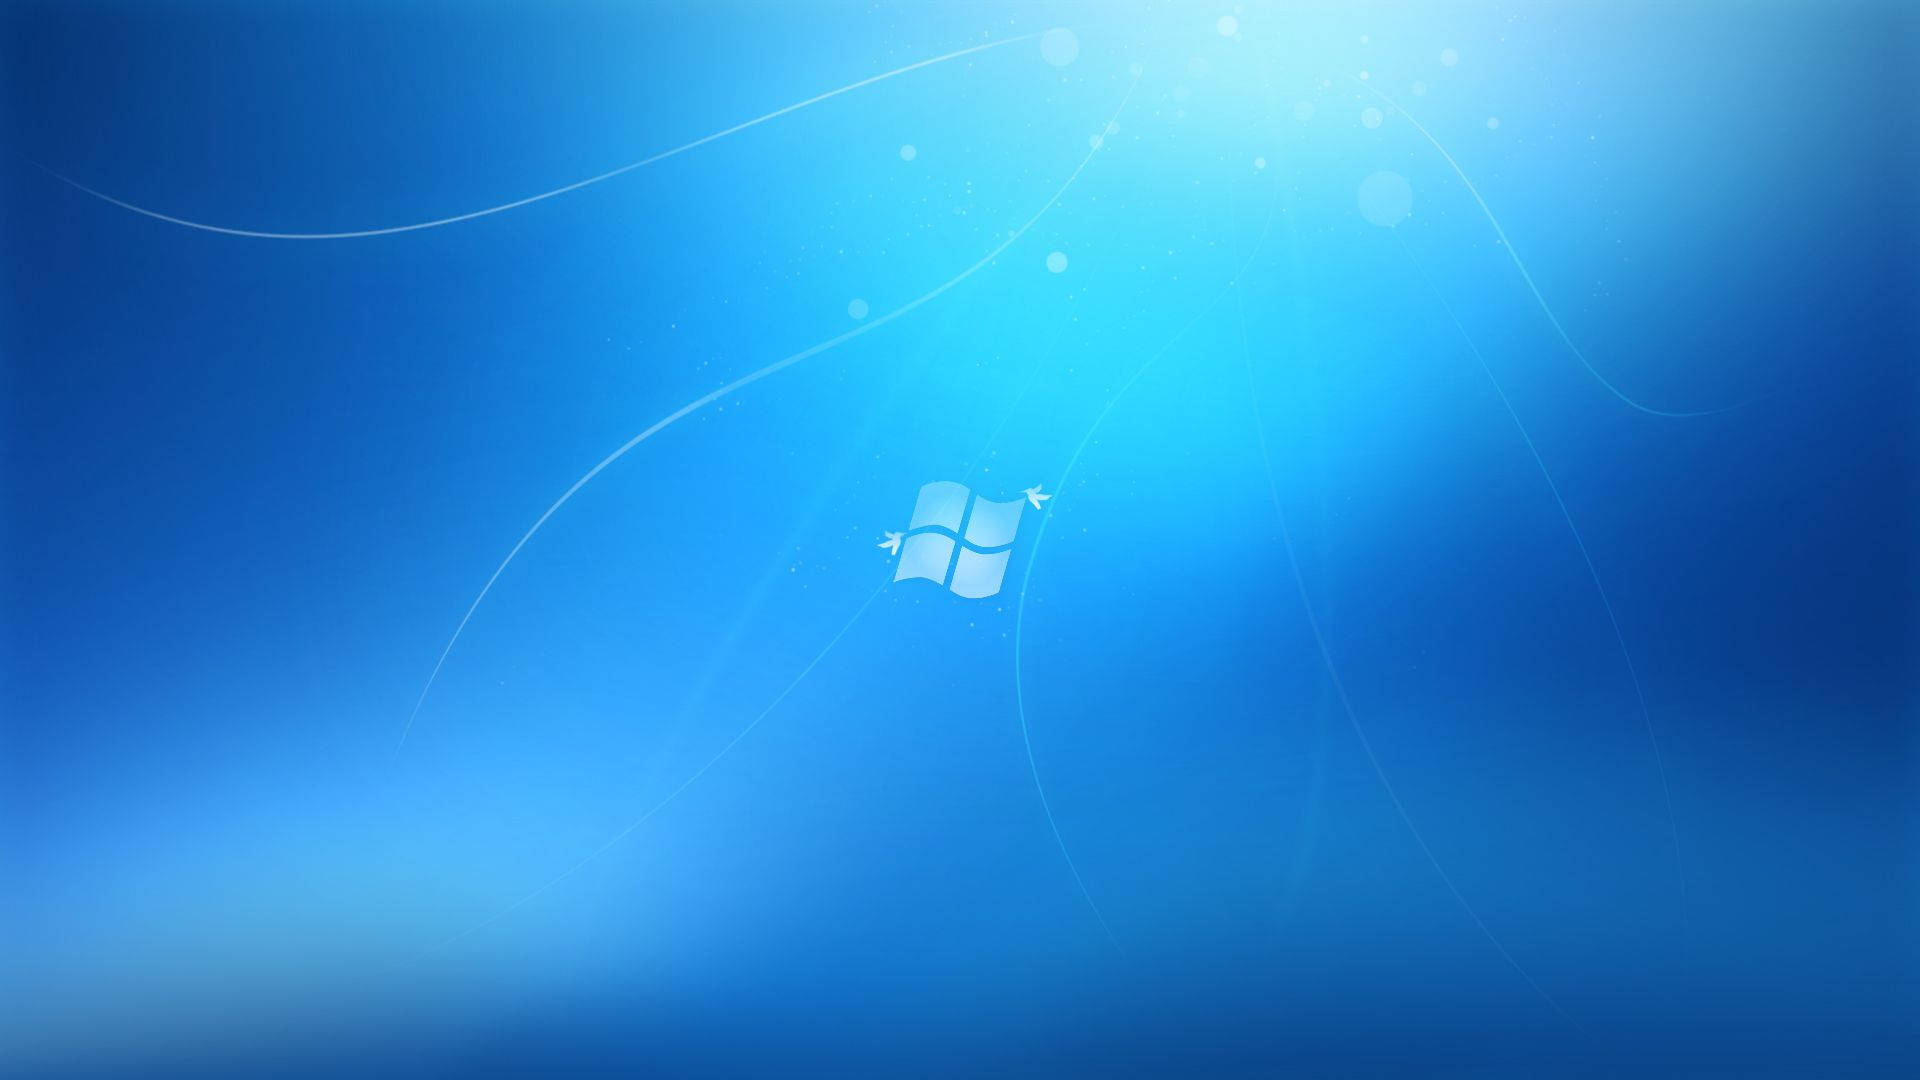 Windows 1920X1080 Wallpaper and Background Image